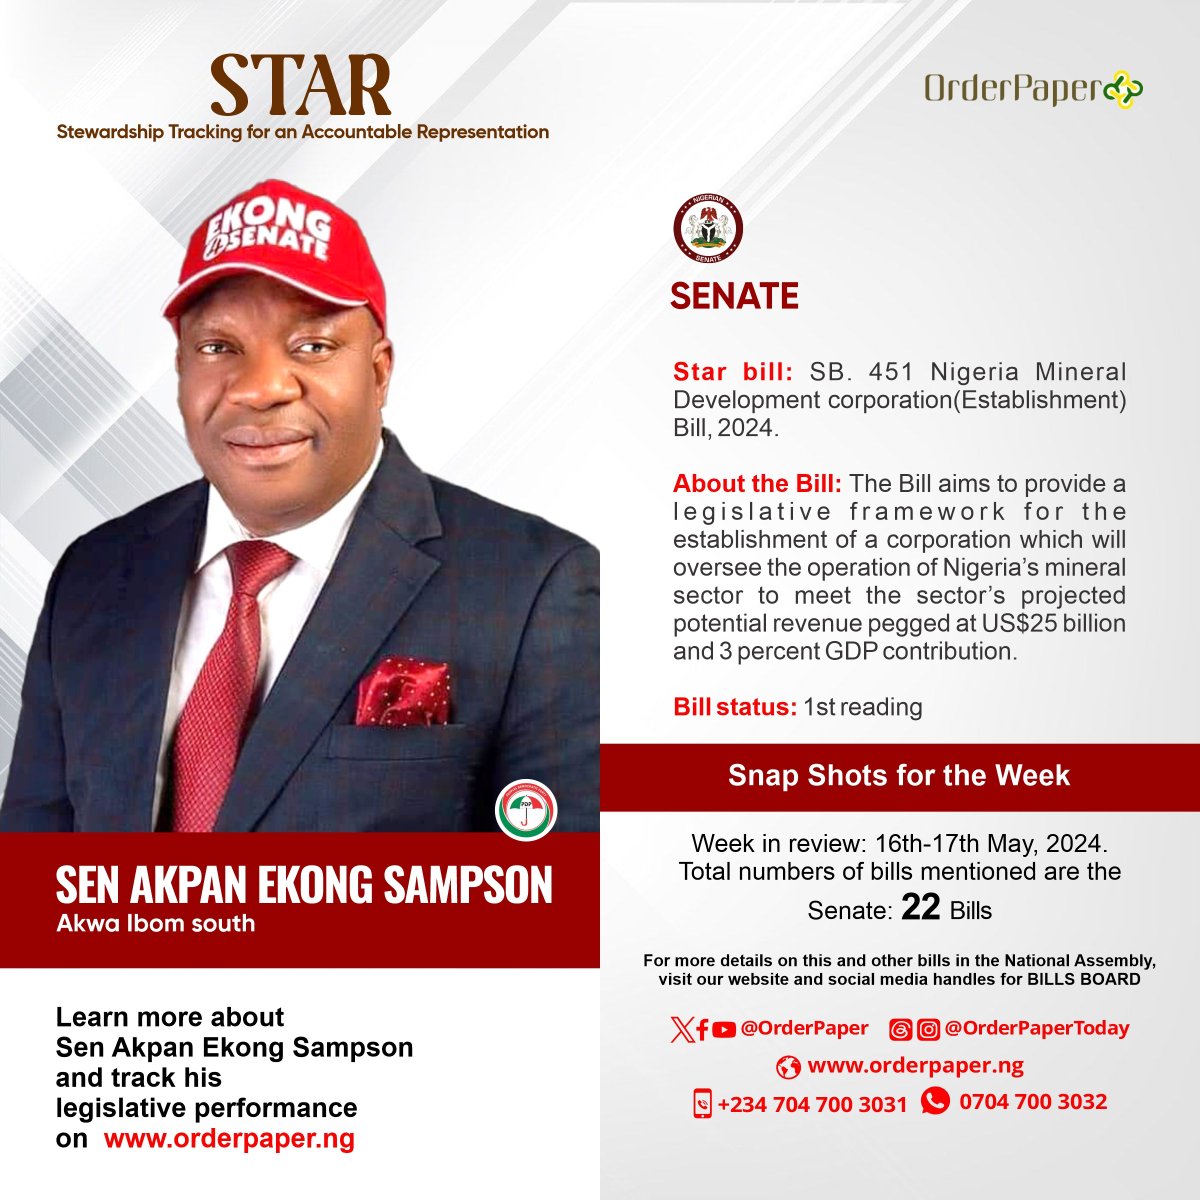 Out of 22 bills presented in the Senate last week, this bill by Senator Akpan Ekong Sampson representing Akwa Ibom South emerges as the STAR Bill. Check flyer for more details Is your Lawmaker sponsoring bills that actually meet your needs? You can find out by keeping tabs